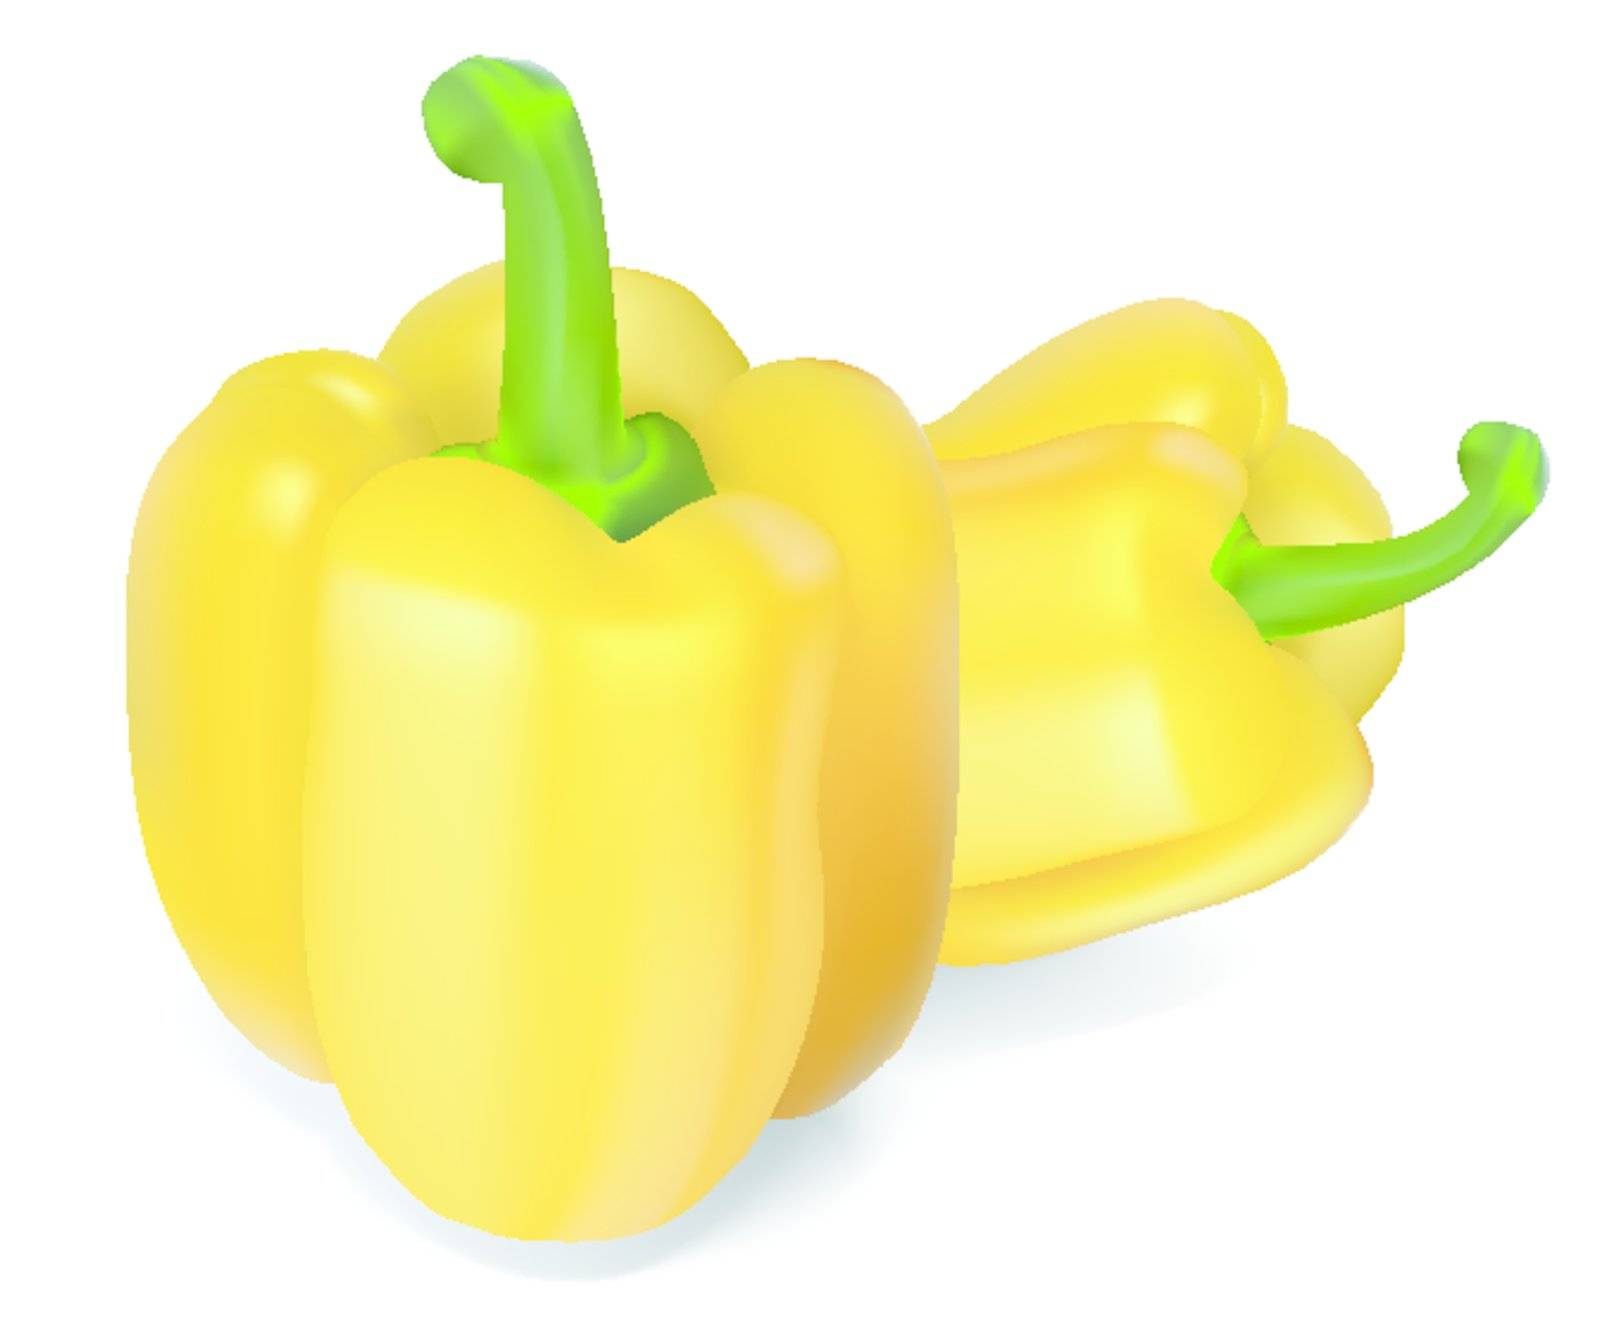 Fresh yellow peppers, vector illustration isolated on a white background